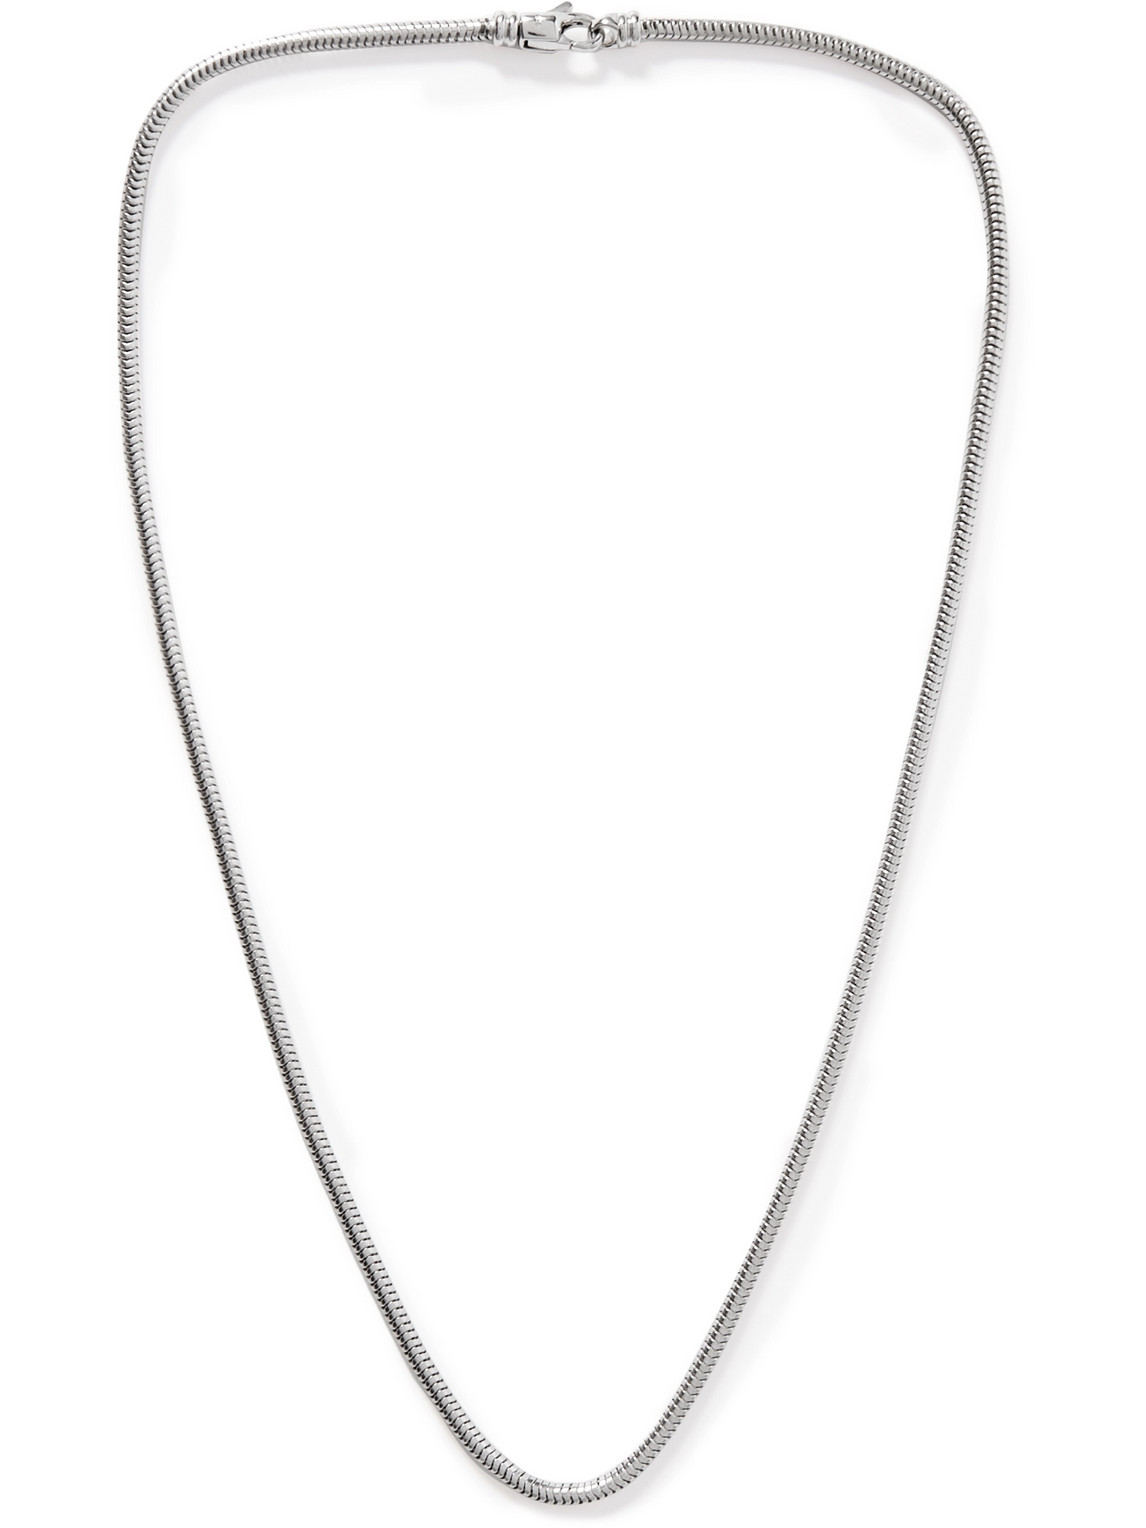 TOM WOOD SNAKE RHODIUM-PLATED SILVER NECKLACE